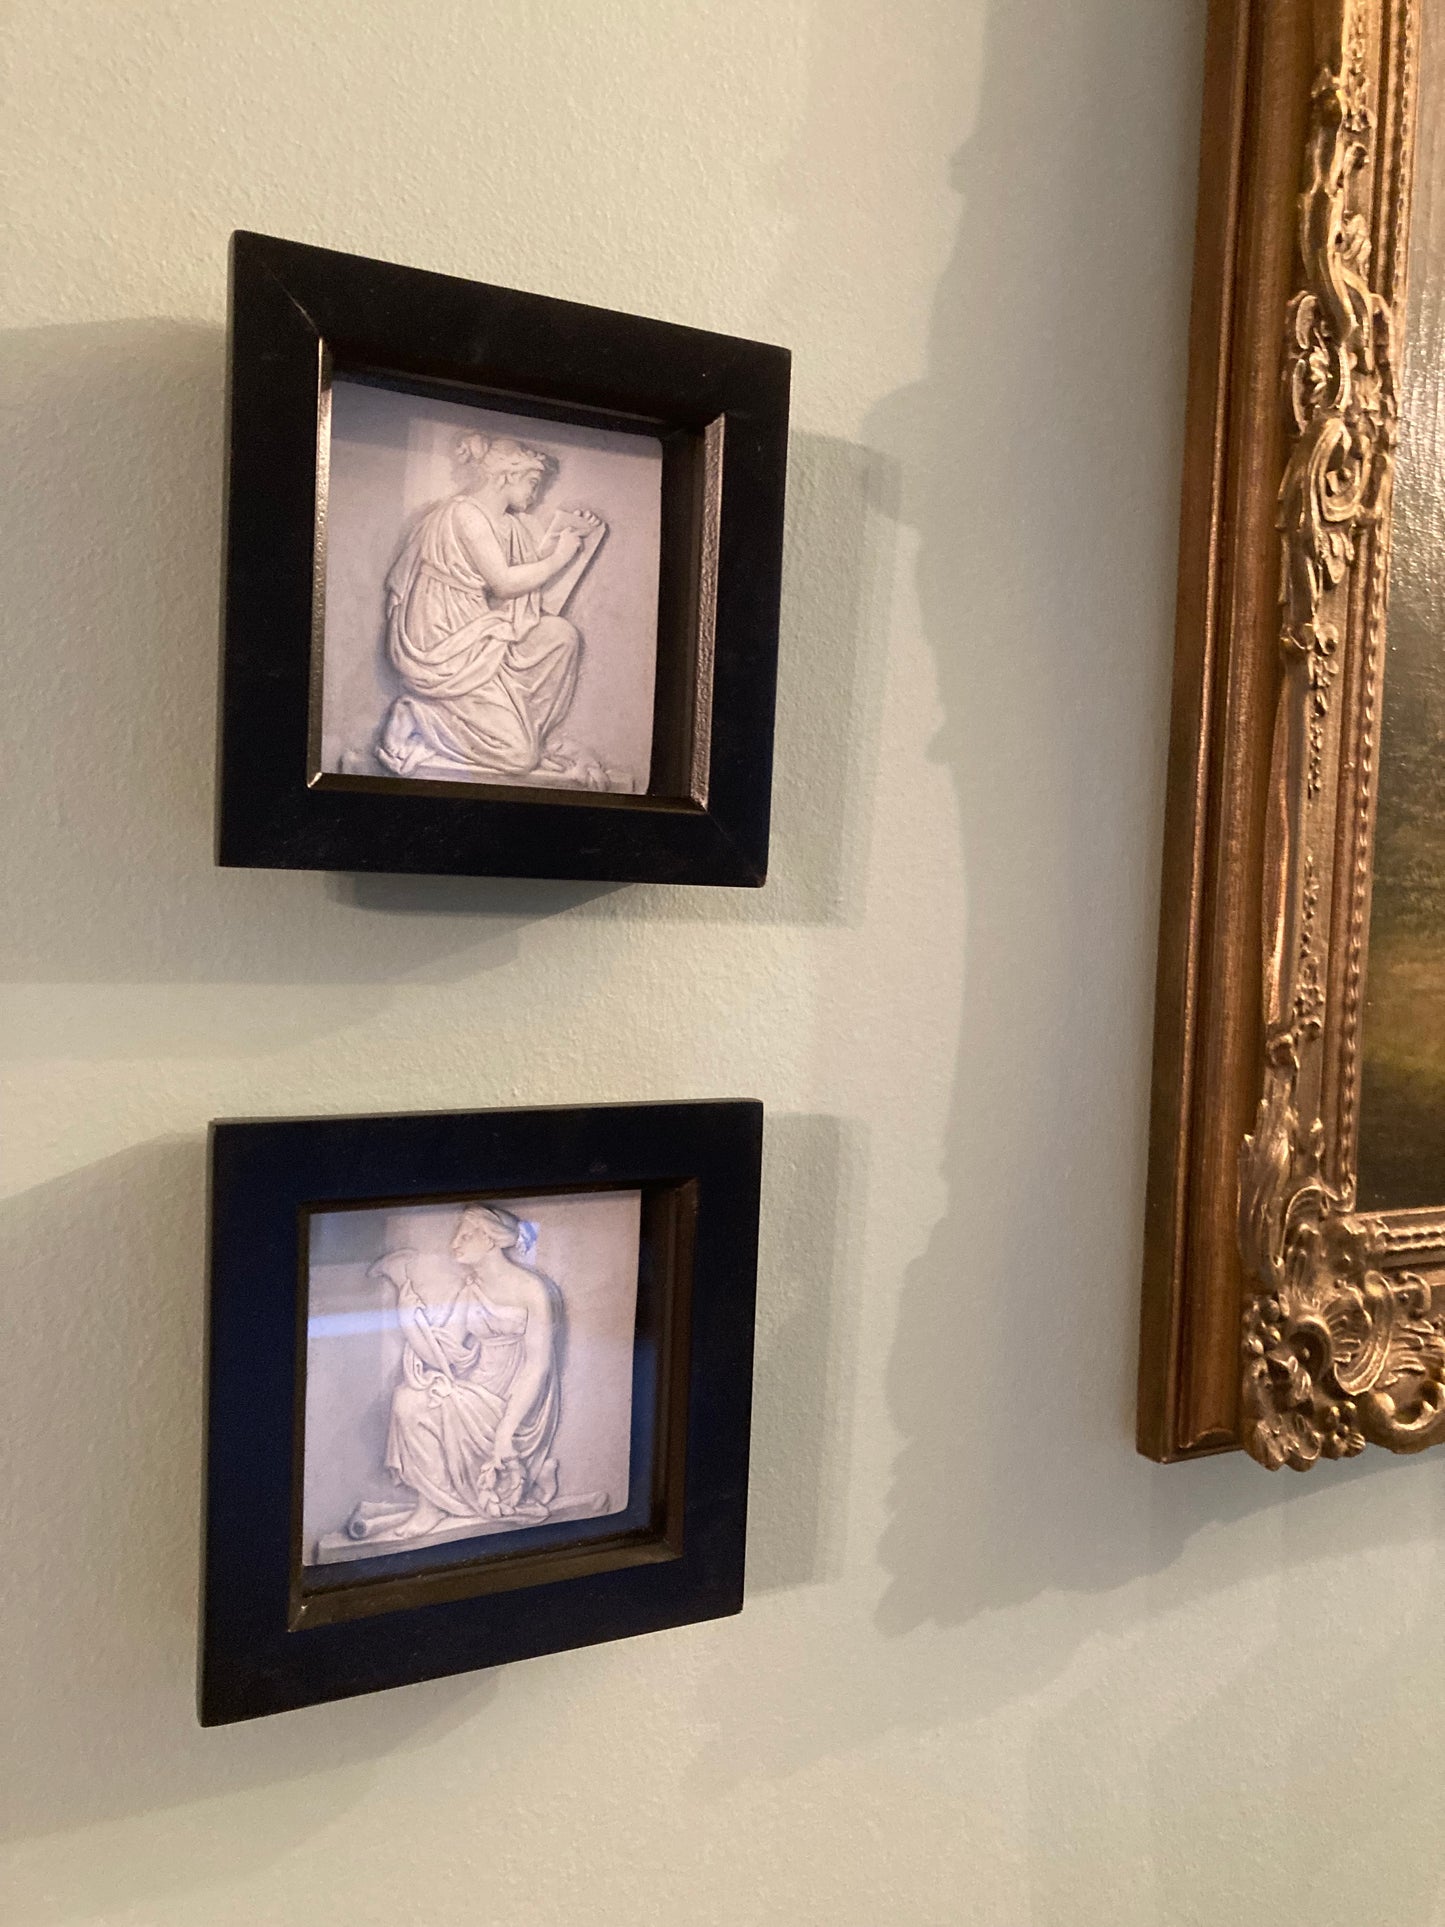 The Arts Pair Framed Reliefs